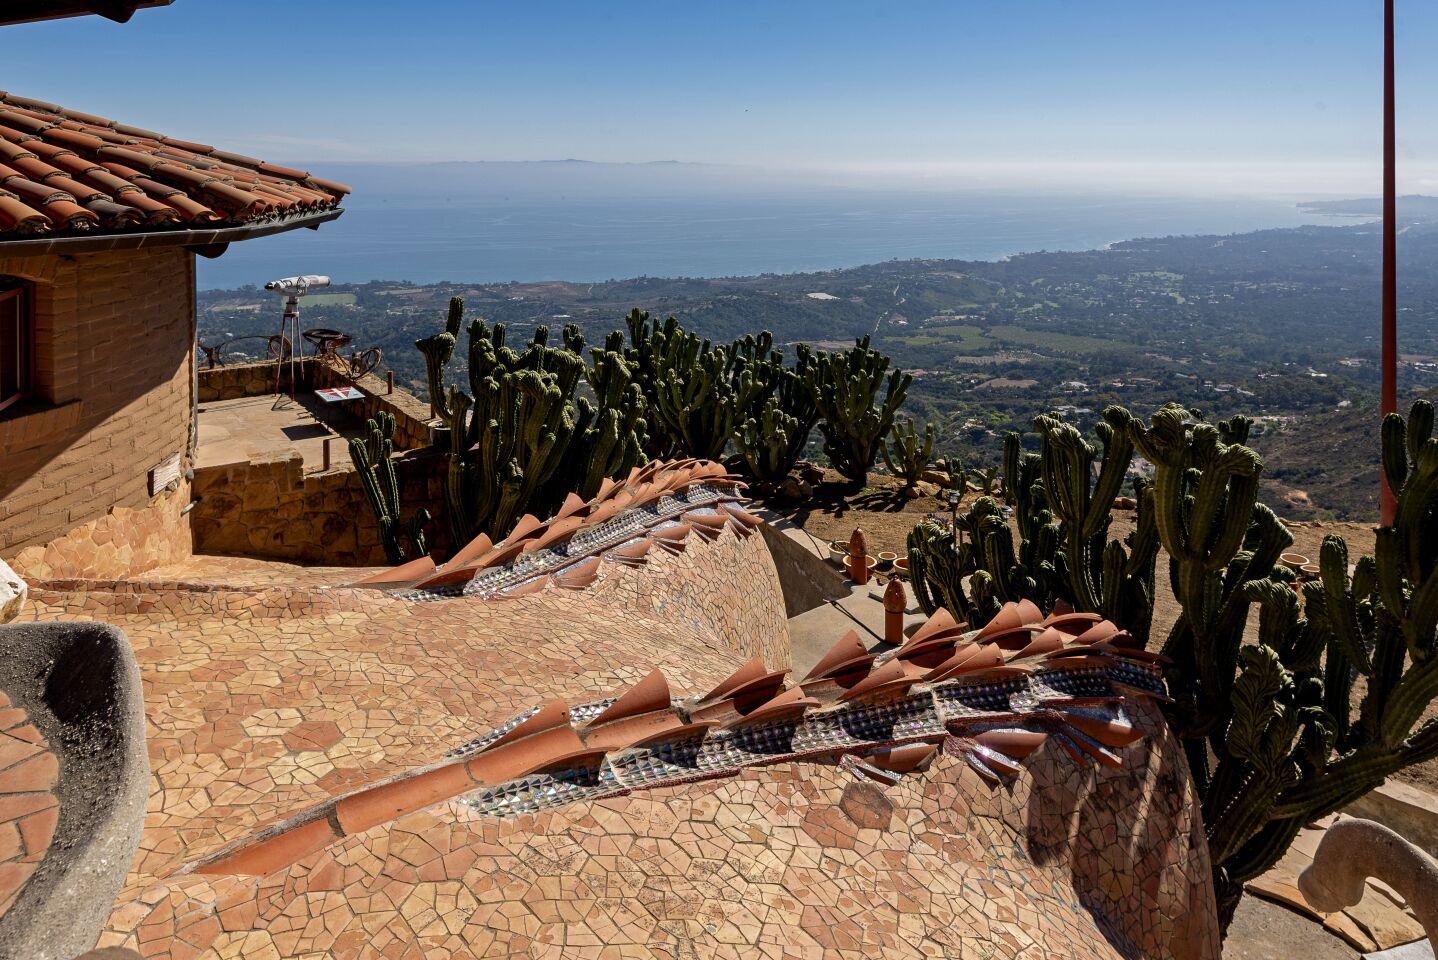 Called the "Castle in the Sky," the unusual residence takes in 360-degree ocean, mountain and island views from its perch in hills above Montecito.